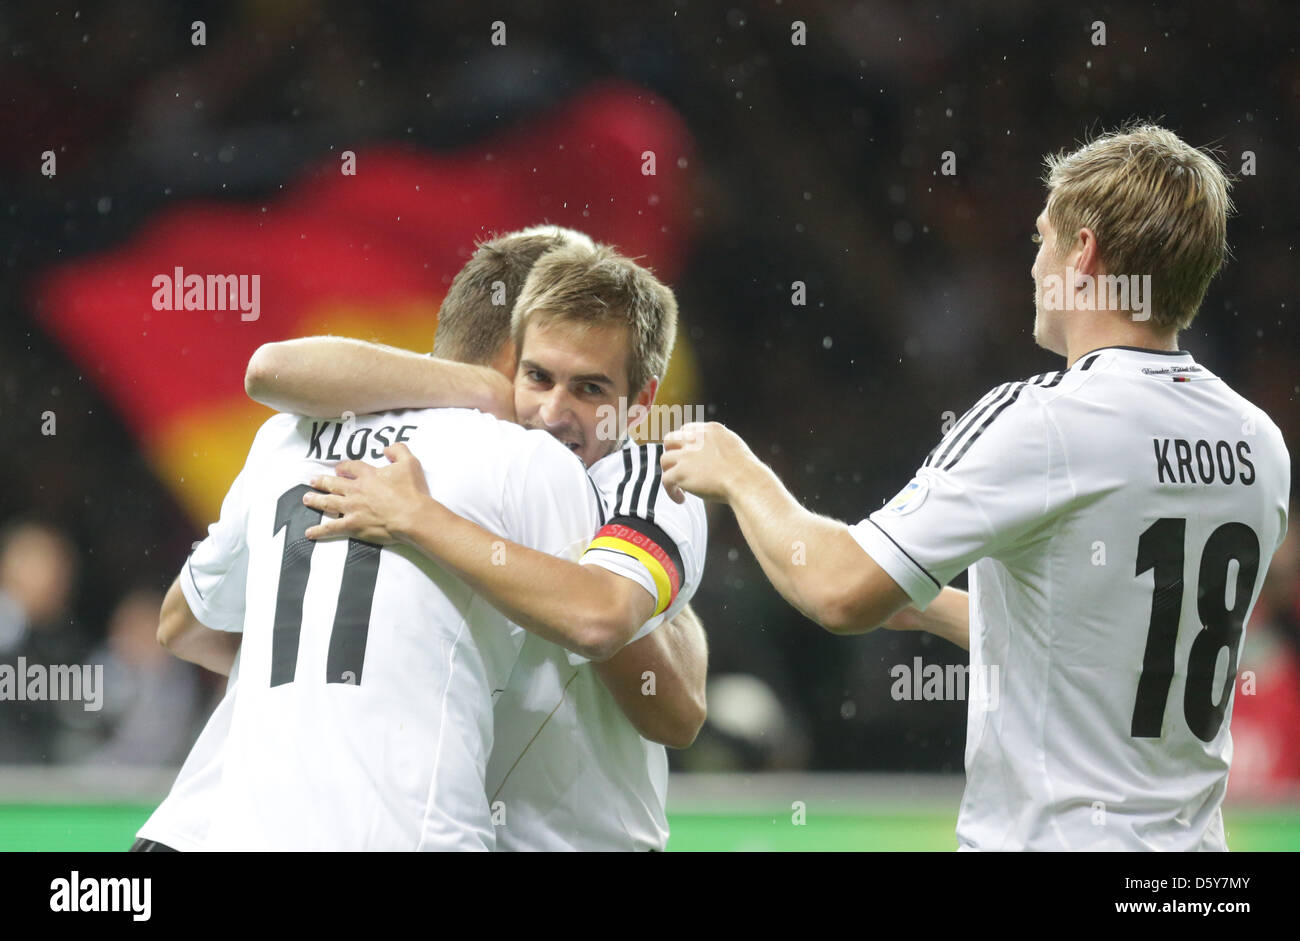 Germany's Miroslav Klose celebrates with team mates Philipp Lahm (C) and Toni Kroos after scoring the opening goal 1-0 during the FIFA World Cup 2014 qualifying soccer match between Germany and Sweden at Olympic stadium in Berlin, Germany, 16 October 2012. Photo: Michael Kappeler/dpa  +++(c) dpa - Bildfunk+++ Stock Photo